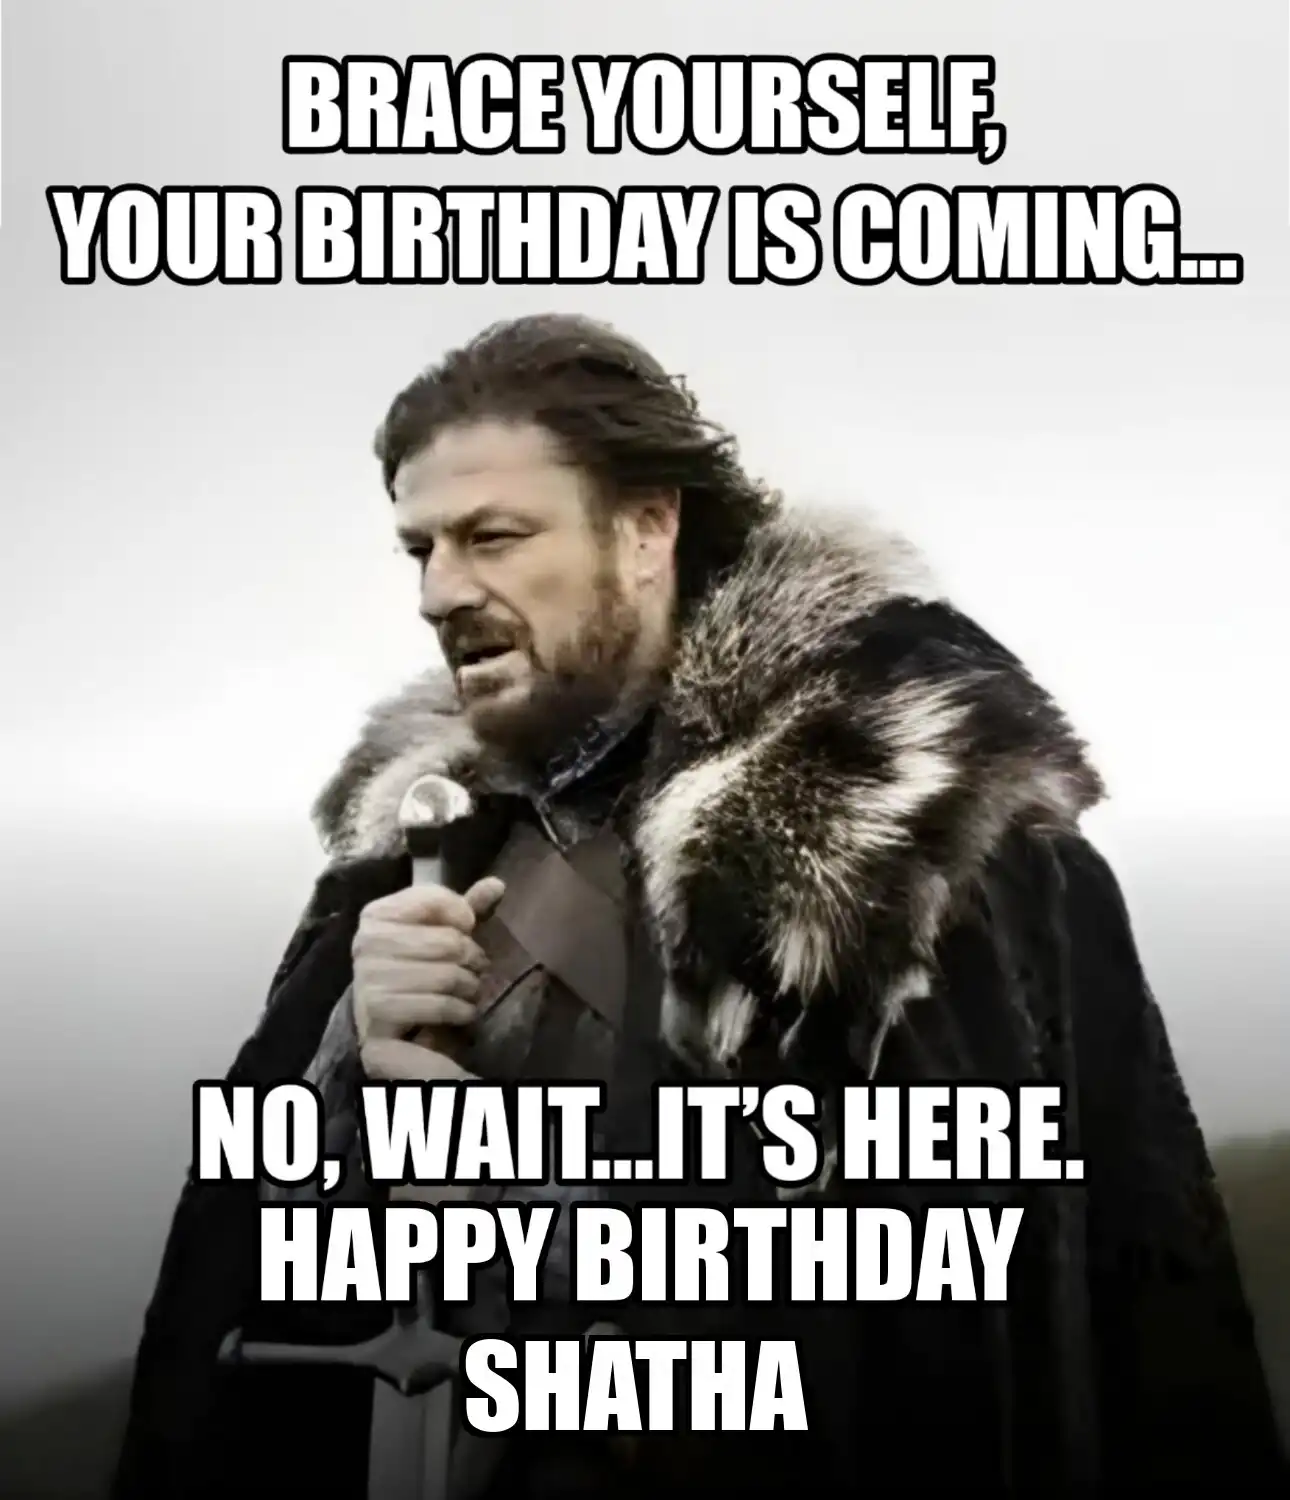 Happy Birthday Shatha Brace Yourself Your Birthday Is Coming Meme